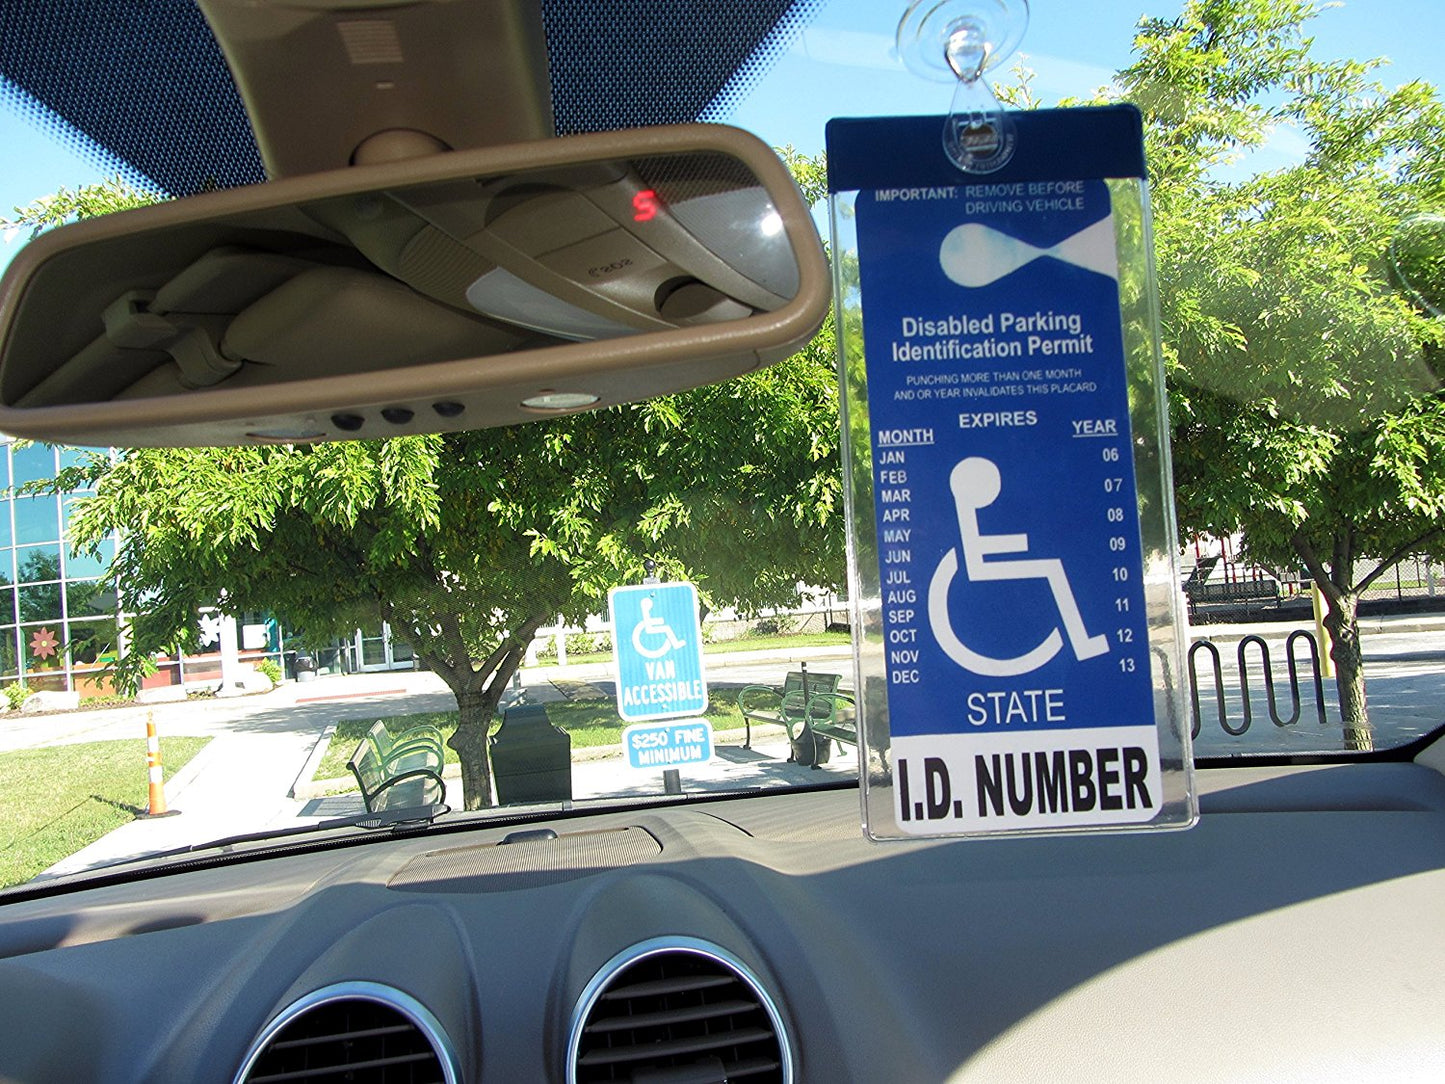 Handicap parking placard holder attached to magnet charm